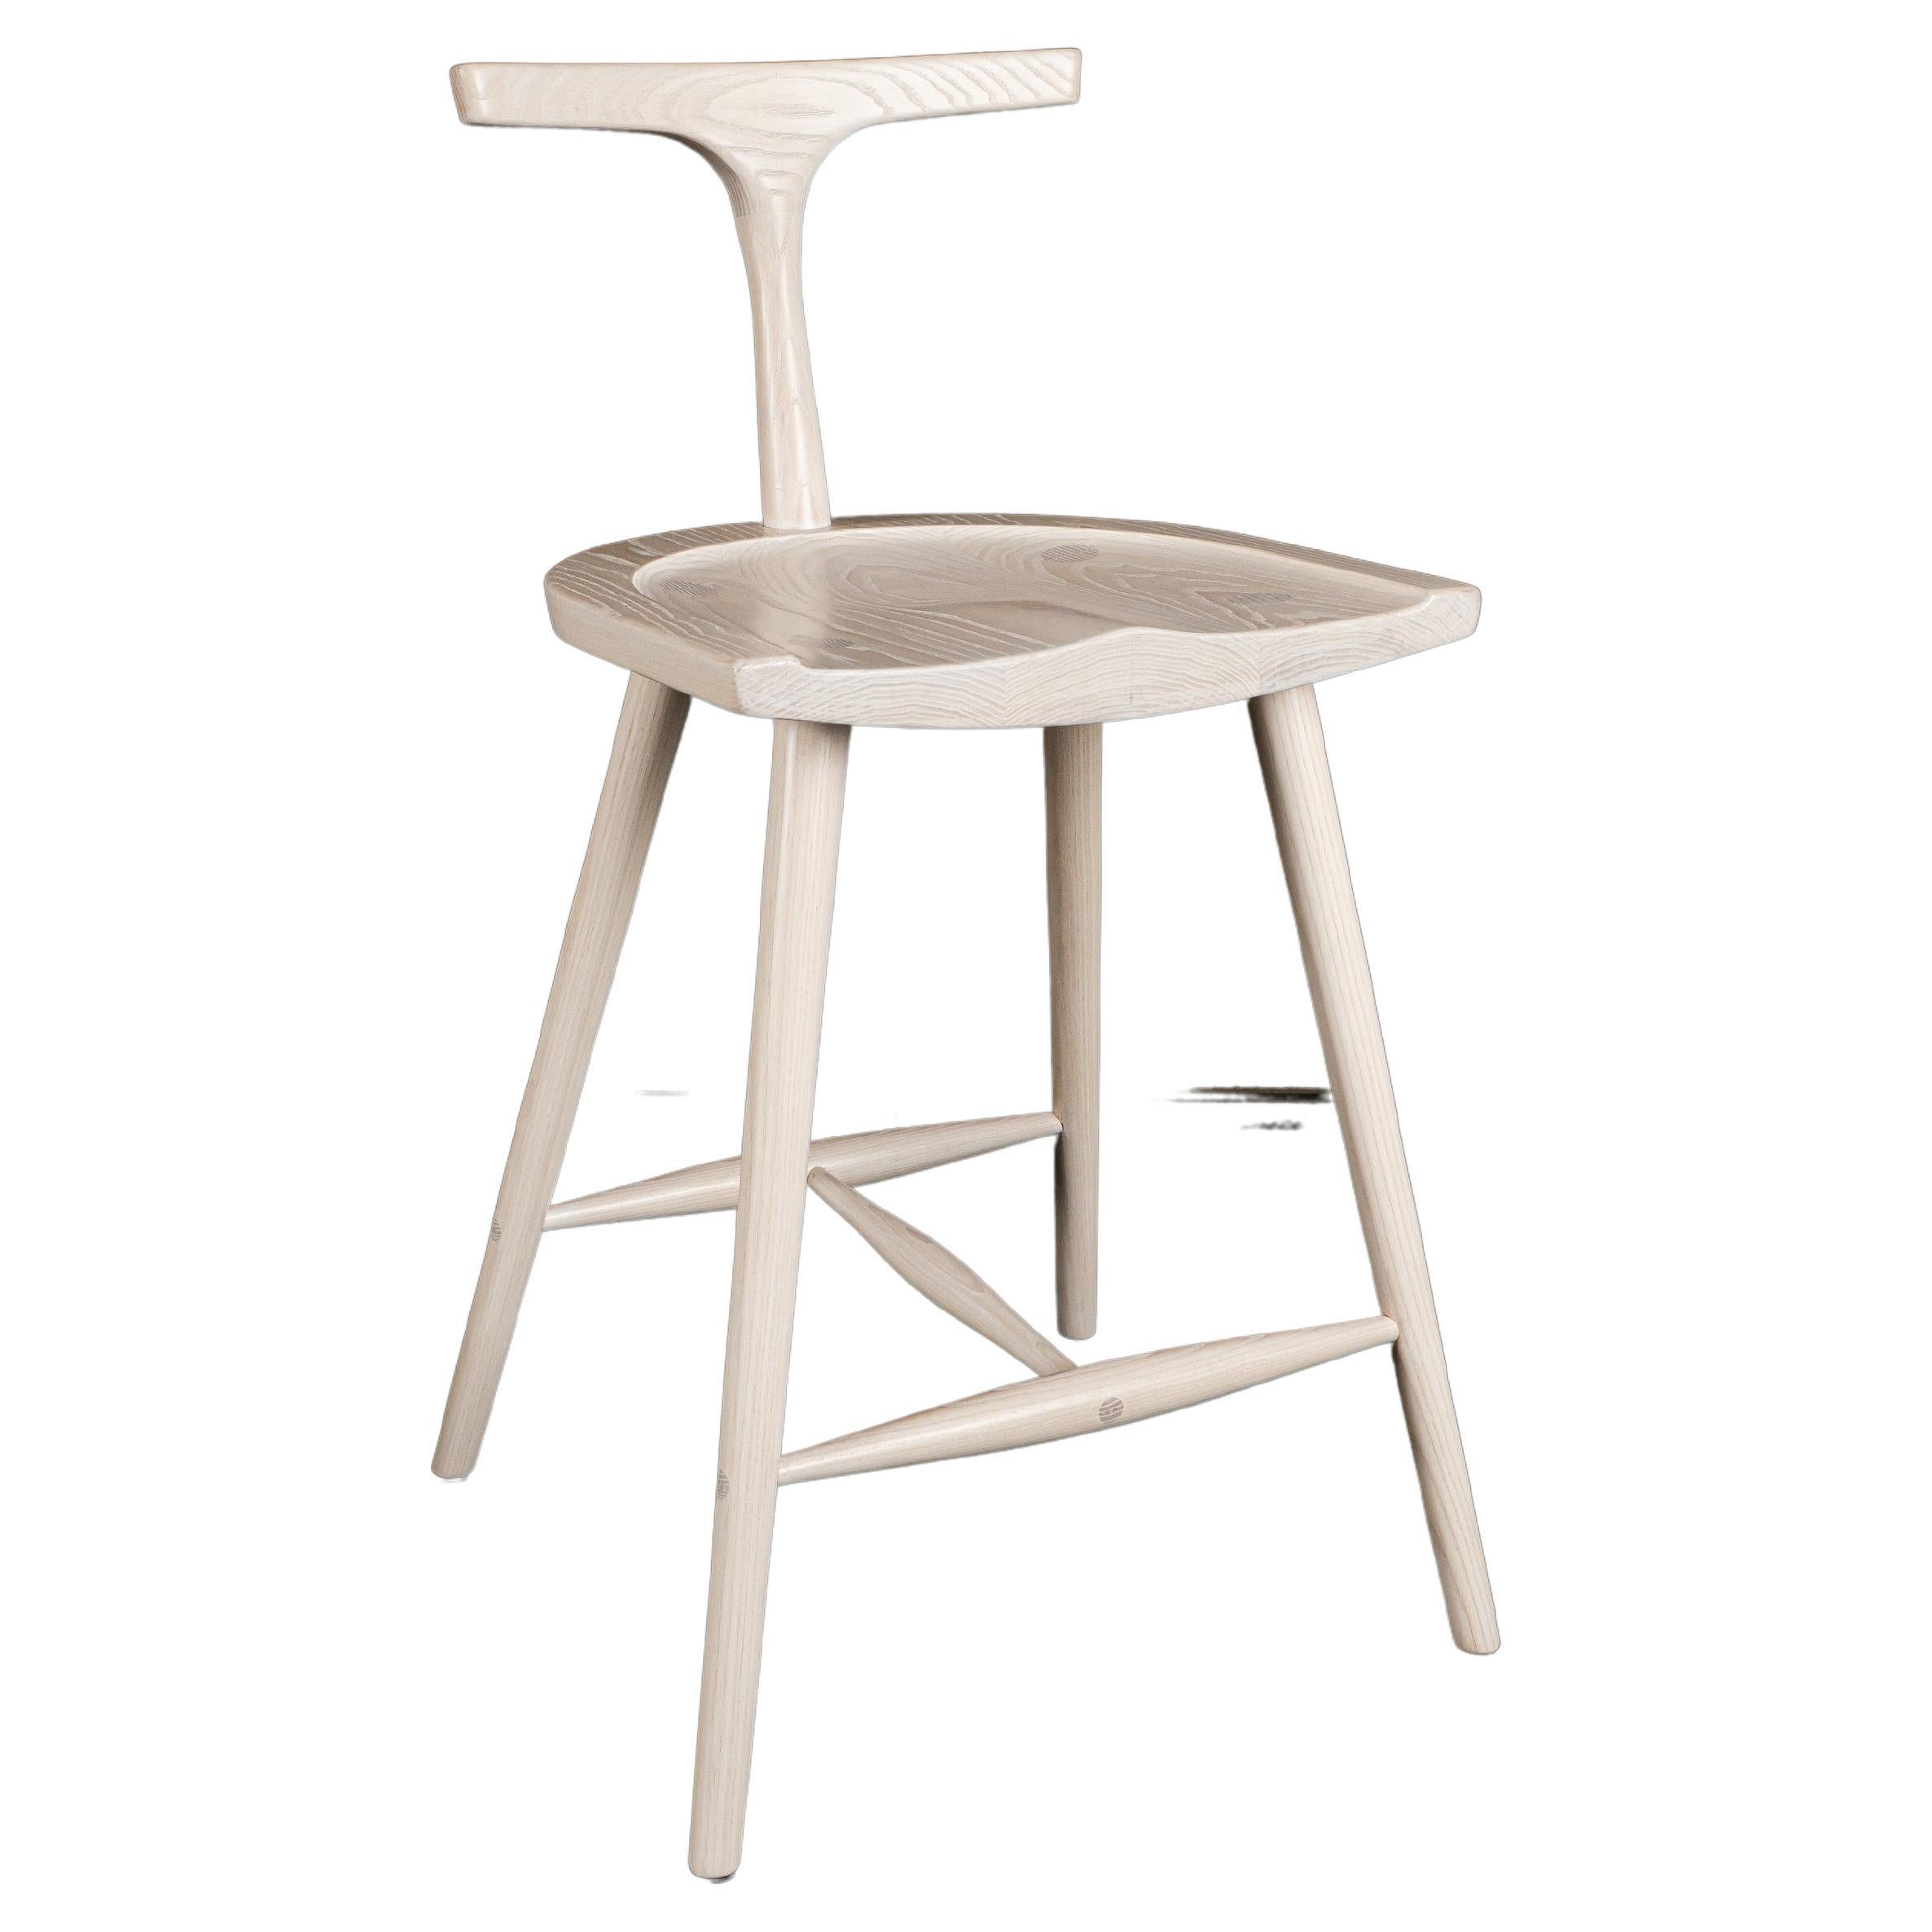 Comfortable, elegant and Classic, a design that will beautifully suit any home interior. Crafted from solid American ash, hand-selected for colour uniformity and quality. The Krane stool features a generously sized, ergonomically sculpted seat with